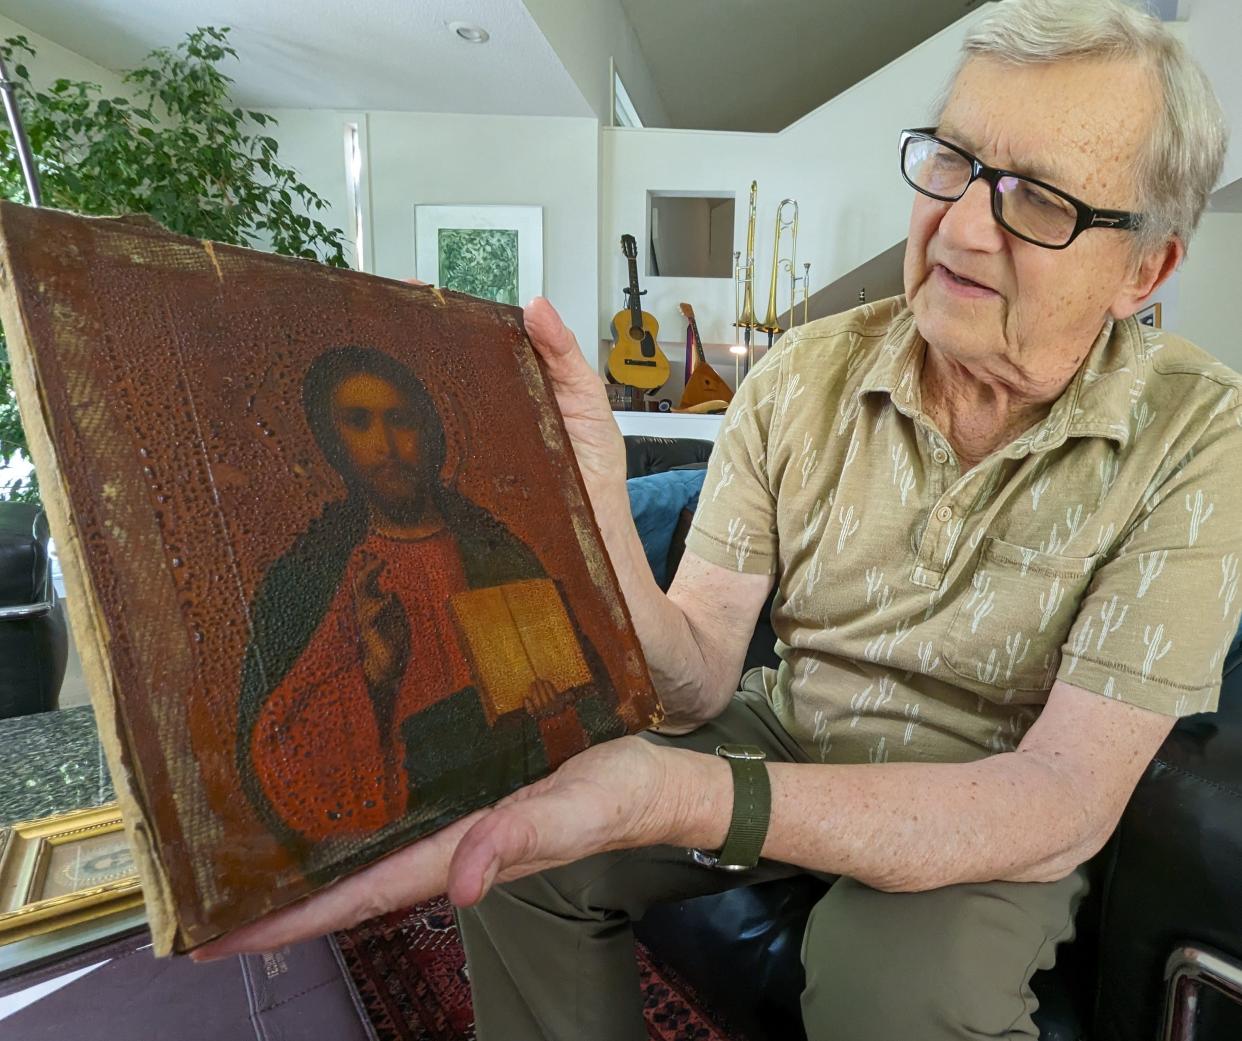 This religious icon, a very old painting of Jesus, was a family heirloom cherished by Bill Nowysz’s mother, who smuggled it out of Poland after World War II. He said axe marks toward the top of the painting show his mother’s attempt to destroy it at one point rather than have it confiscated. He said when it failed to split, she saw that as a sign to protect it at all costs.